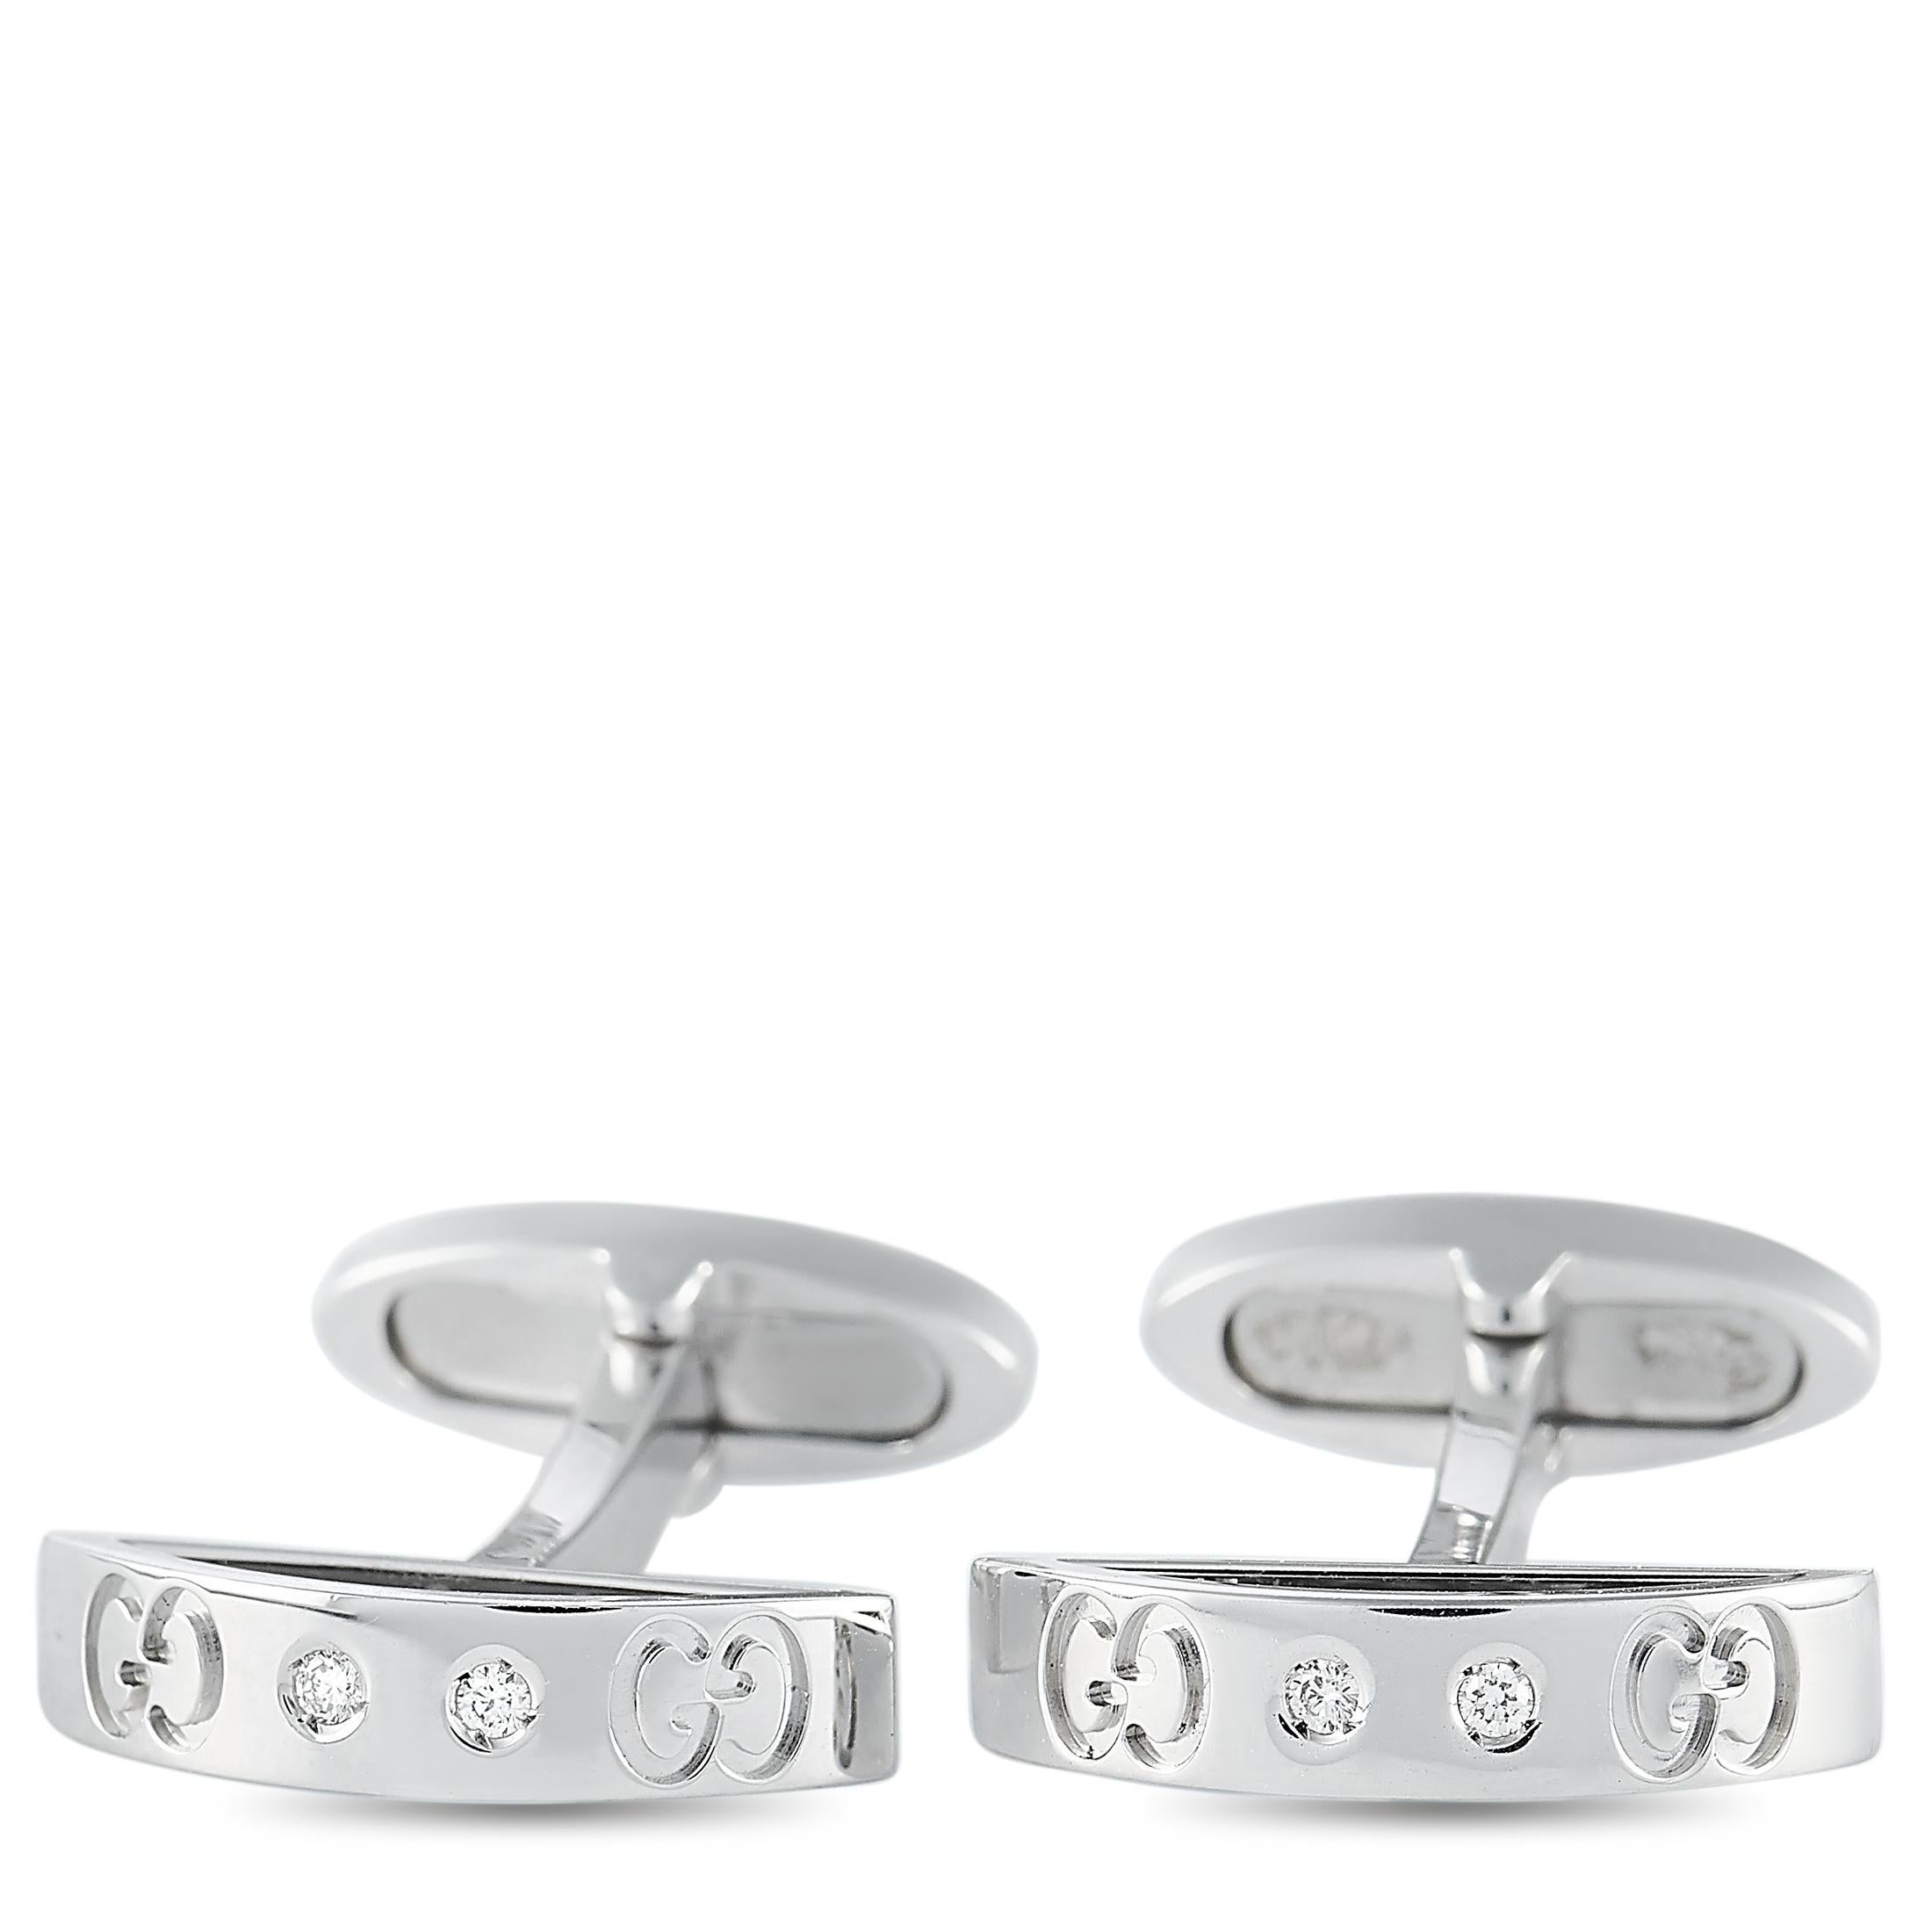 These Gucci cufflinks with the iconic GG motif are made of 18K white gold and embellished with diamonds. The cufflinks measure 0.70” in length and 0.16” in width, and each of the two weighs 4.8 grams.
 
 The pair is offered in estate condition and